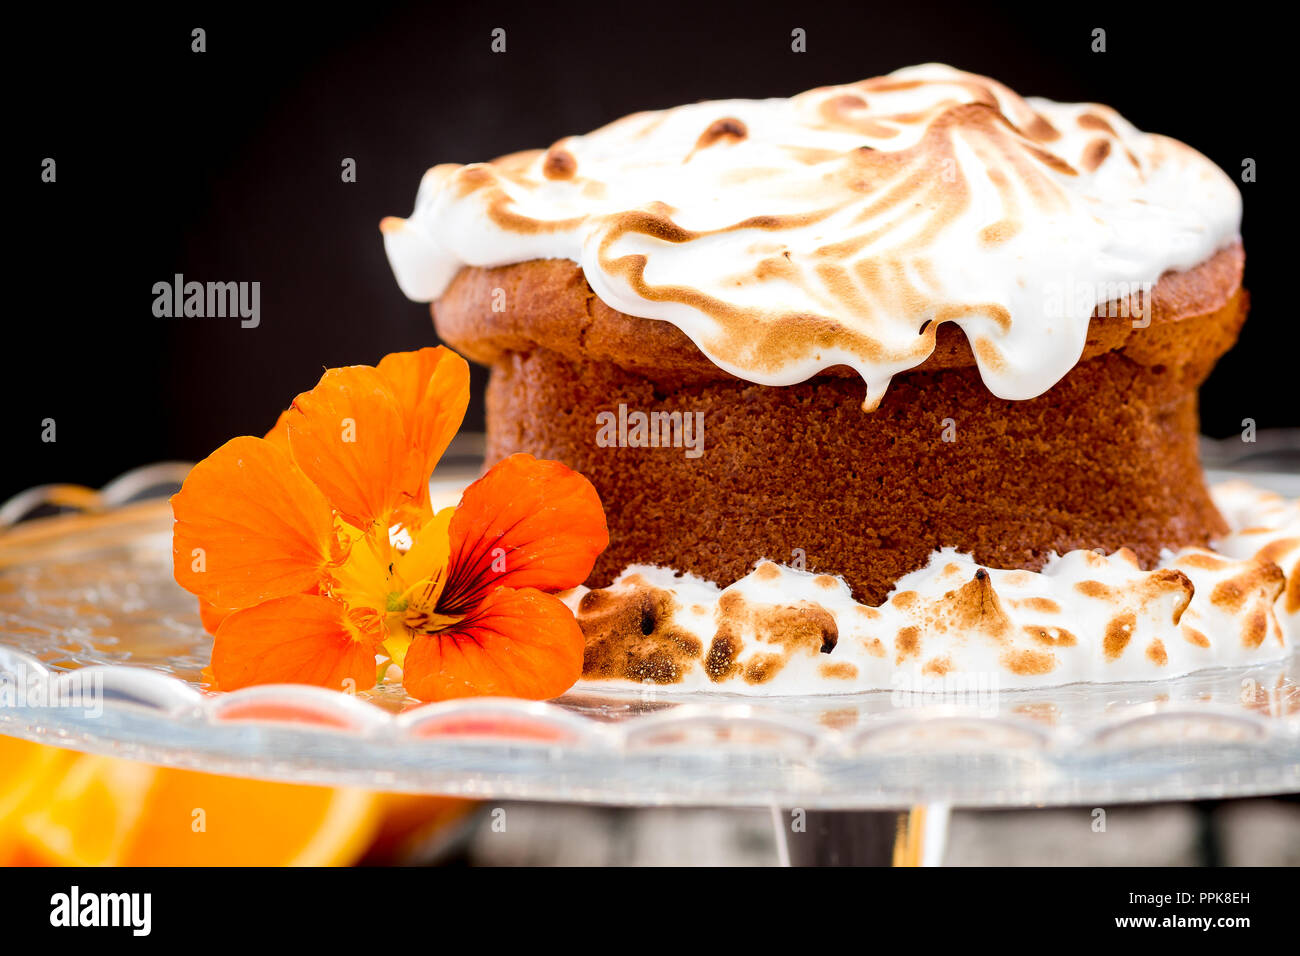 Whole Orange cake with meringue topping and edible flowers Stock Photo